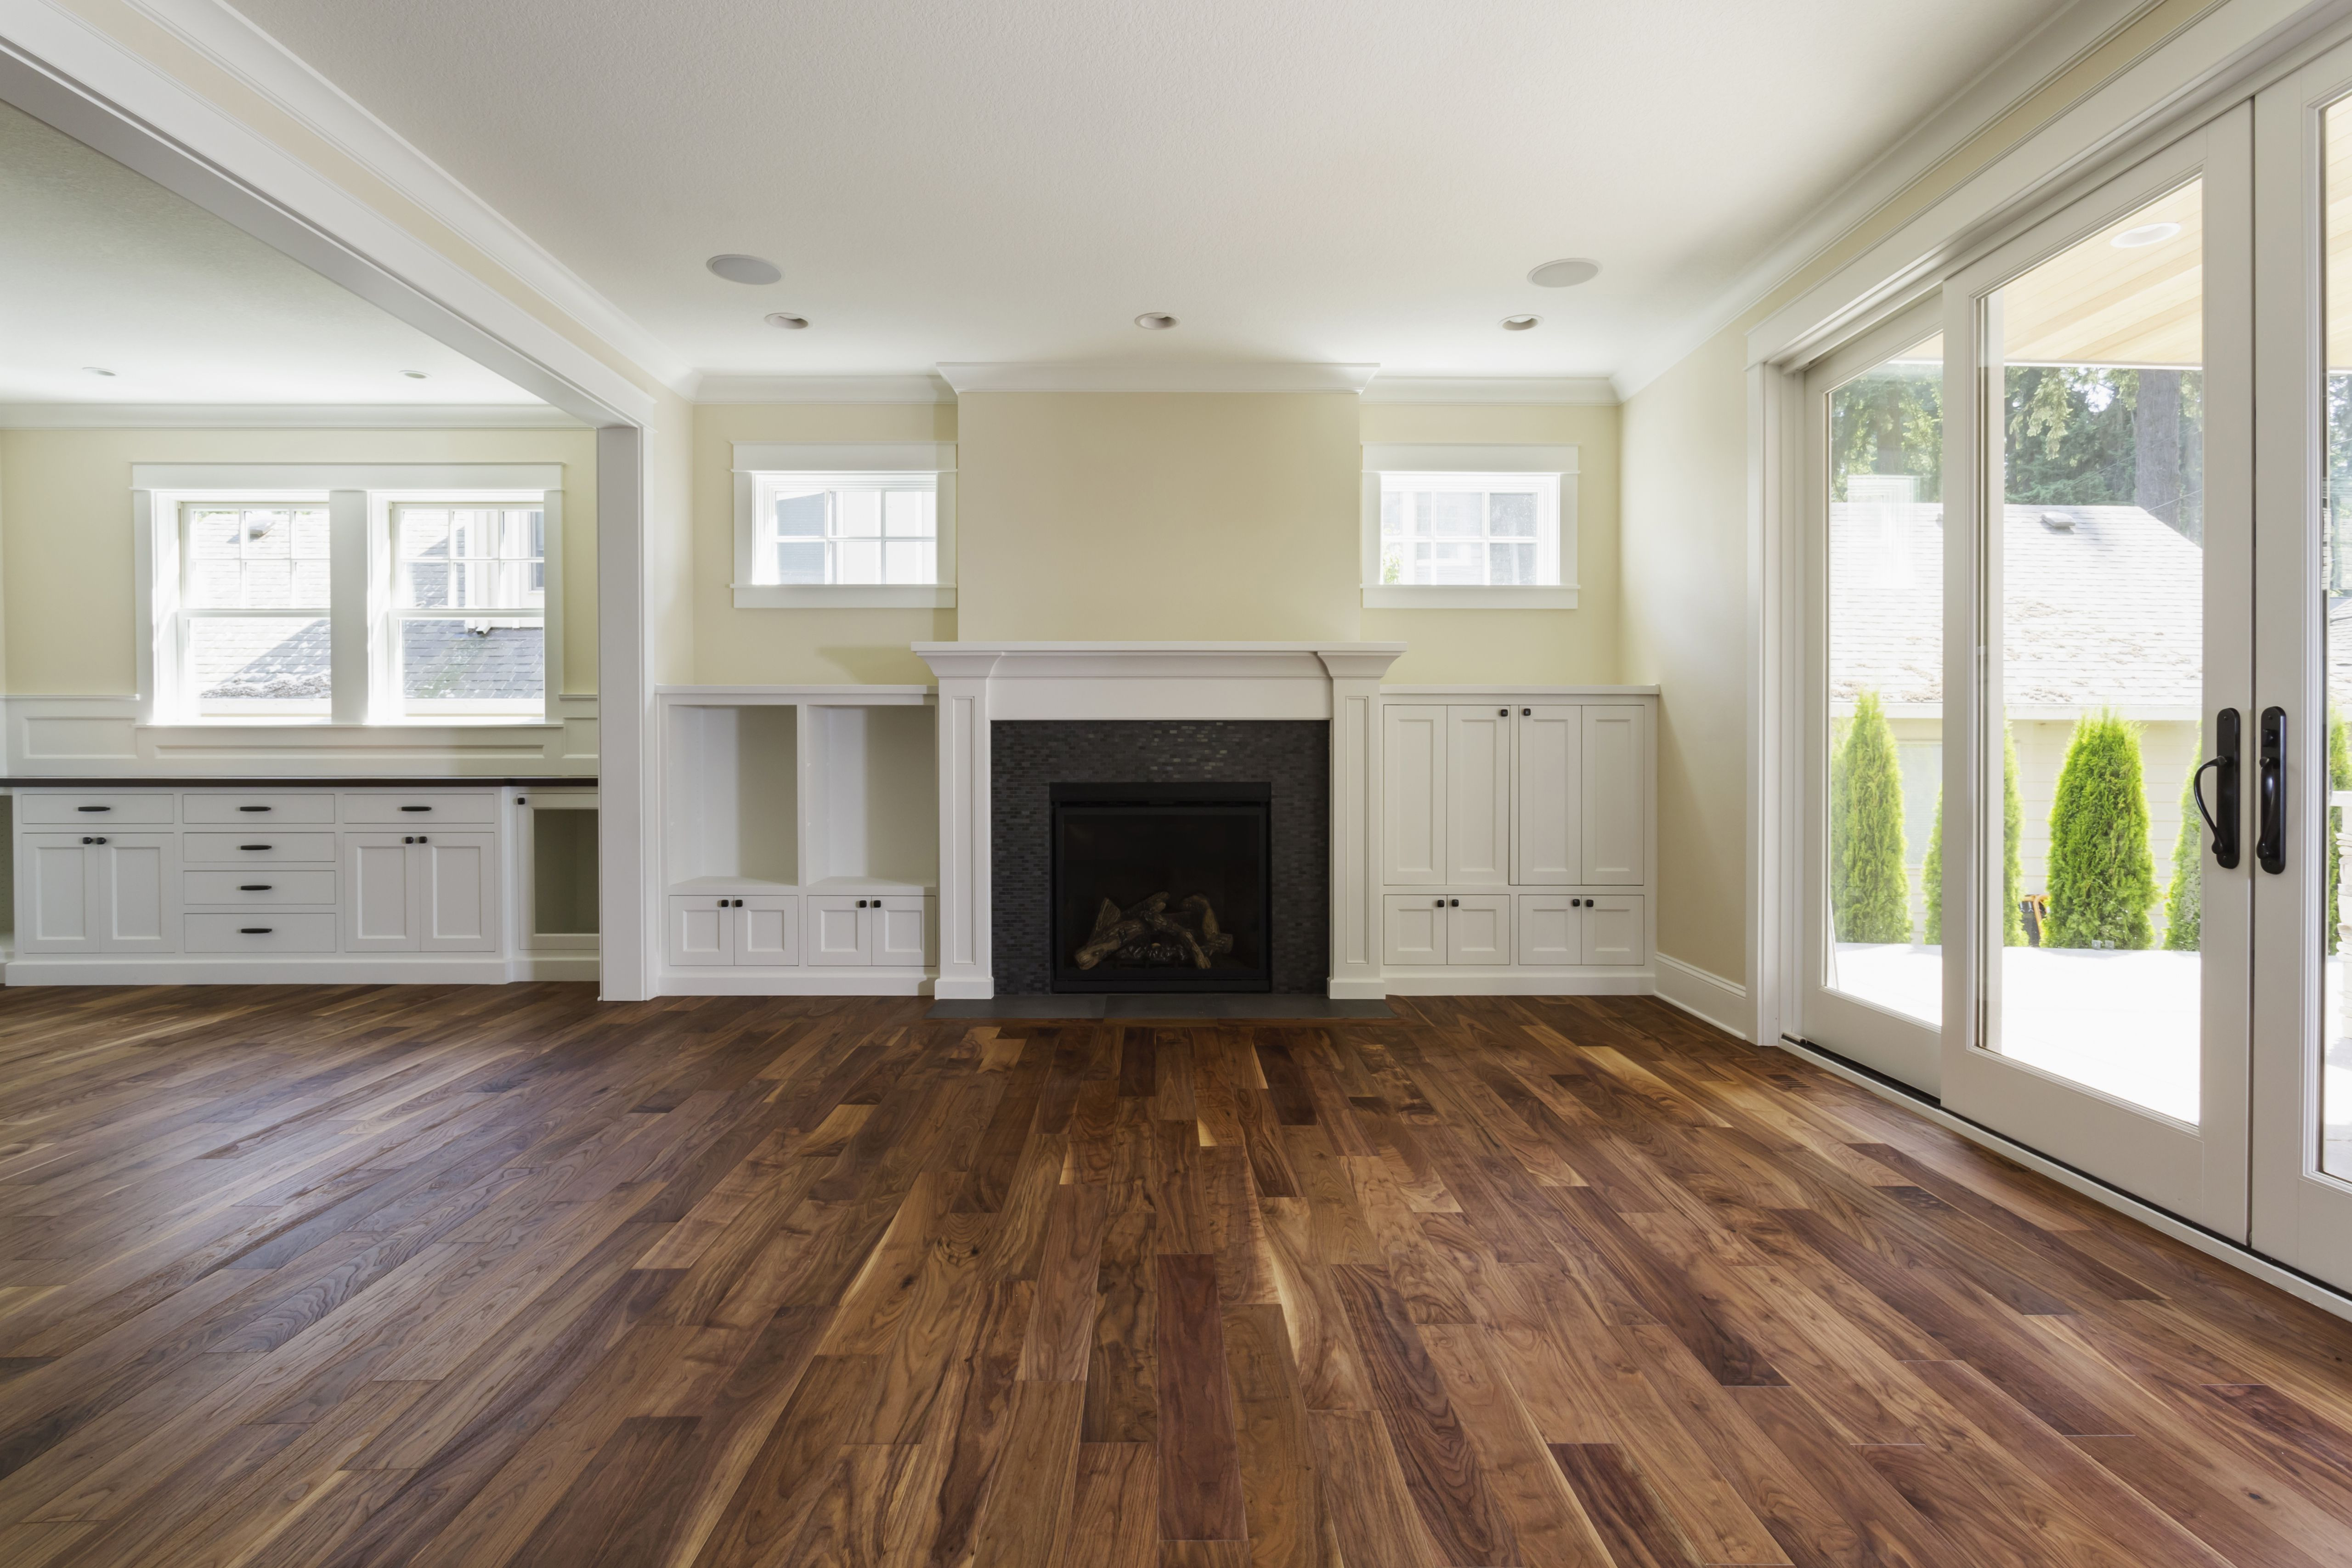 red oak hardwood flooring cost of the pros and cons of prefinished hardwood flooring intended for fireplace and built in shelves in living room 482143011 57bef8e33df78cc16e035397